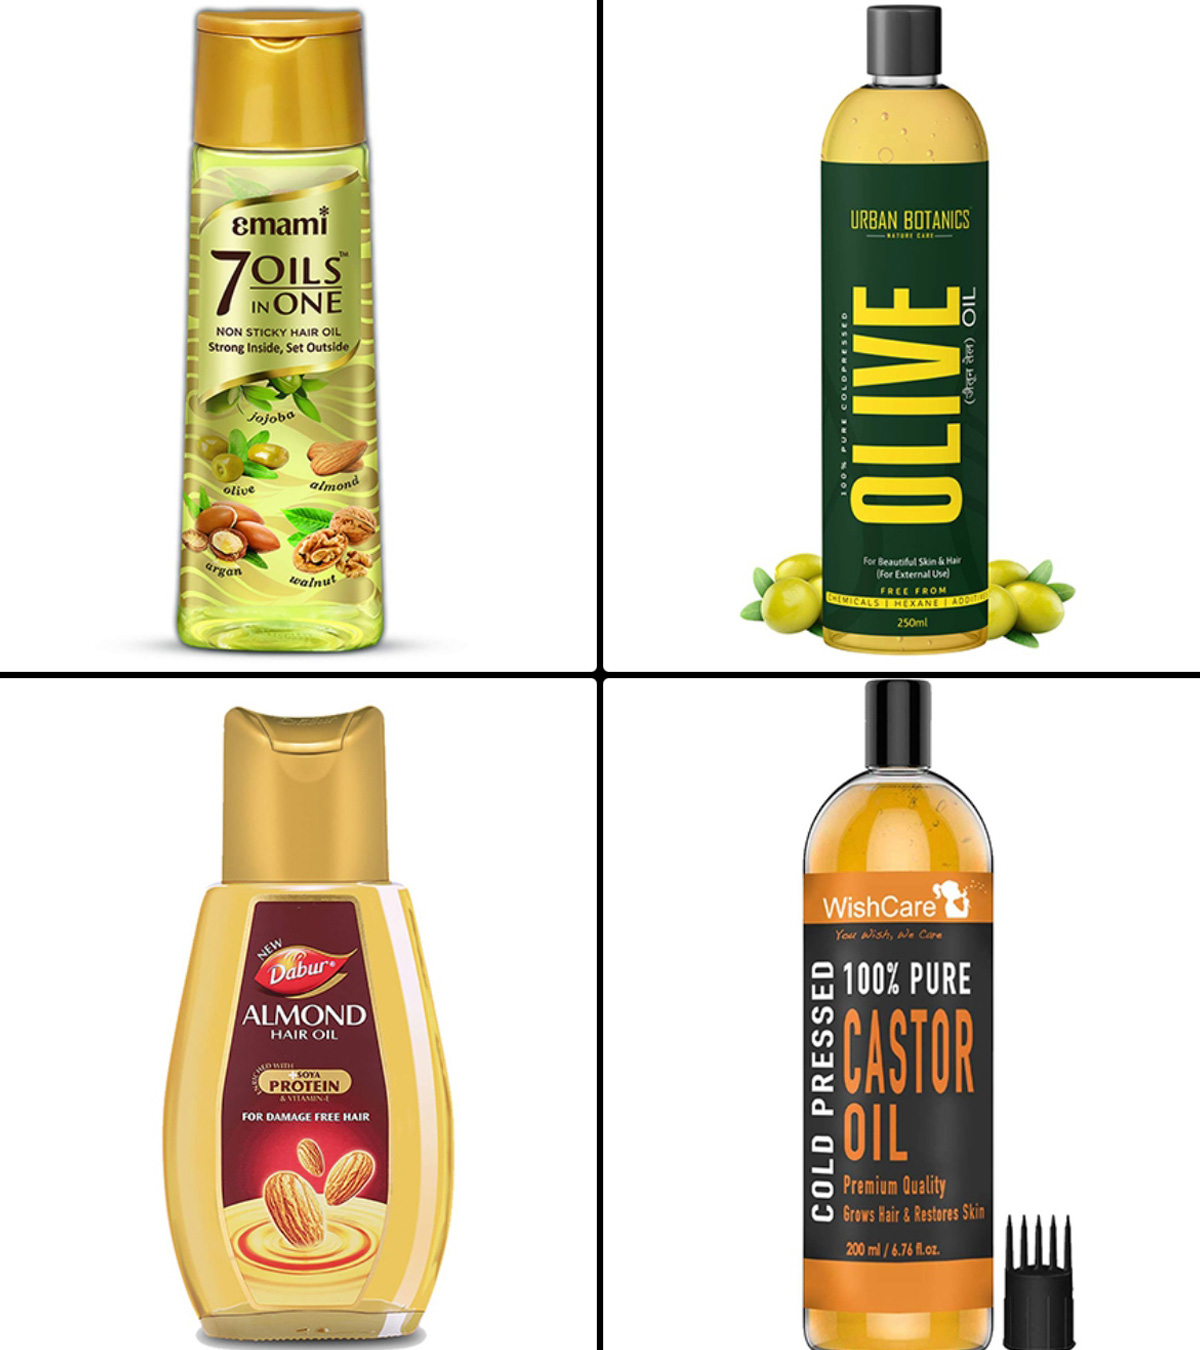 What is the best hair oil alternative? - Quora